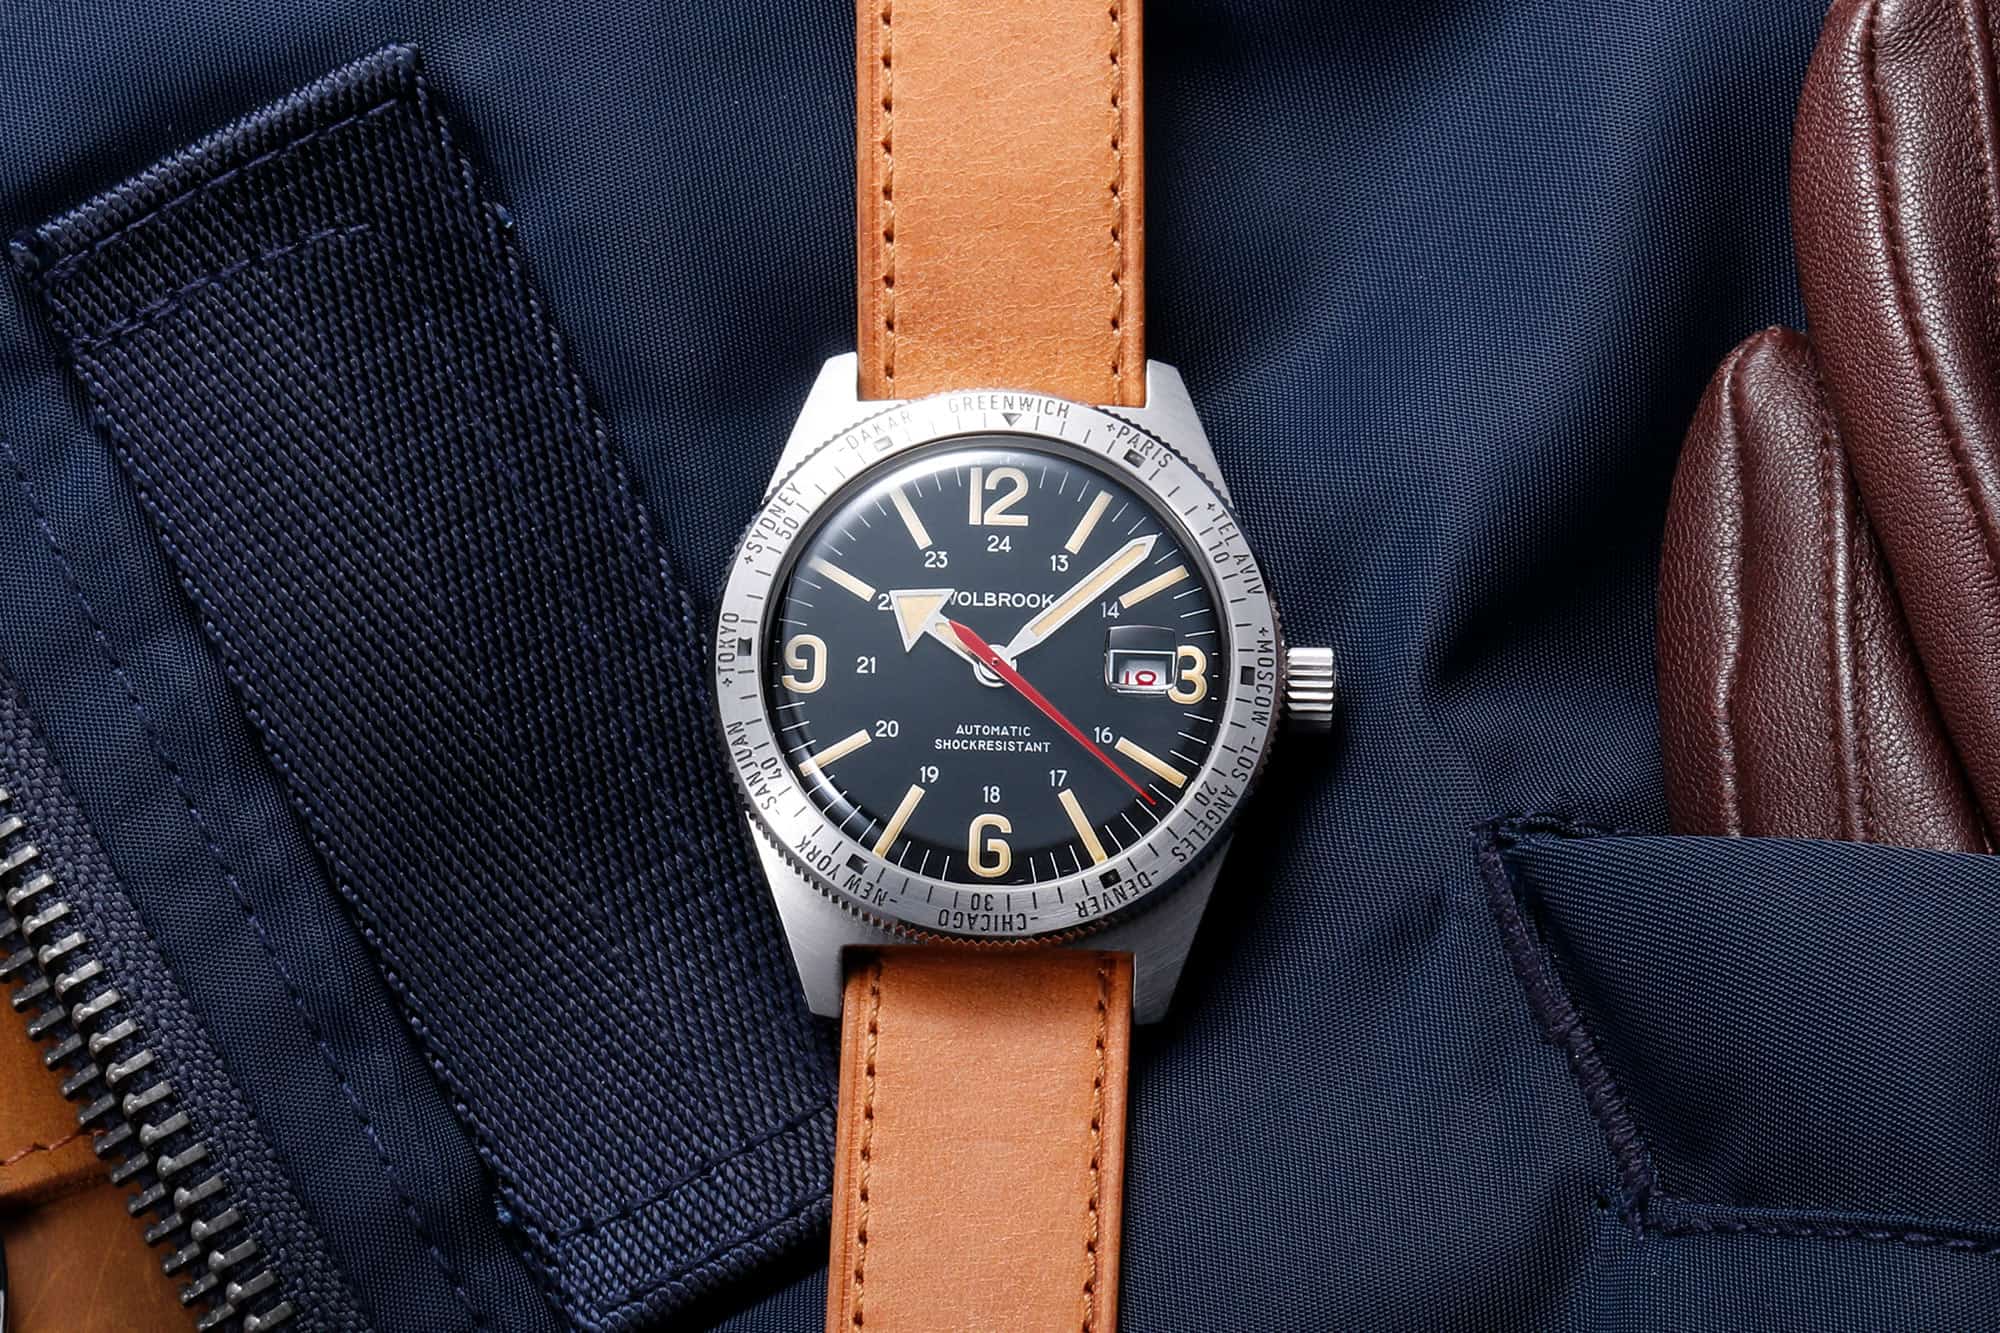 Bringing Back Neil Armstrong’s Personal Watch: the Wolbrook Skindiver WT